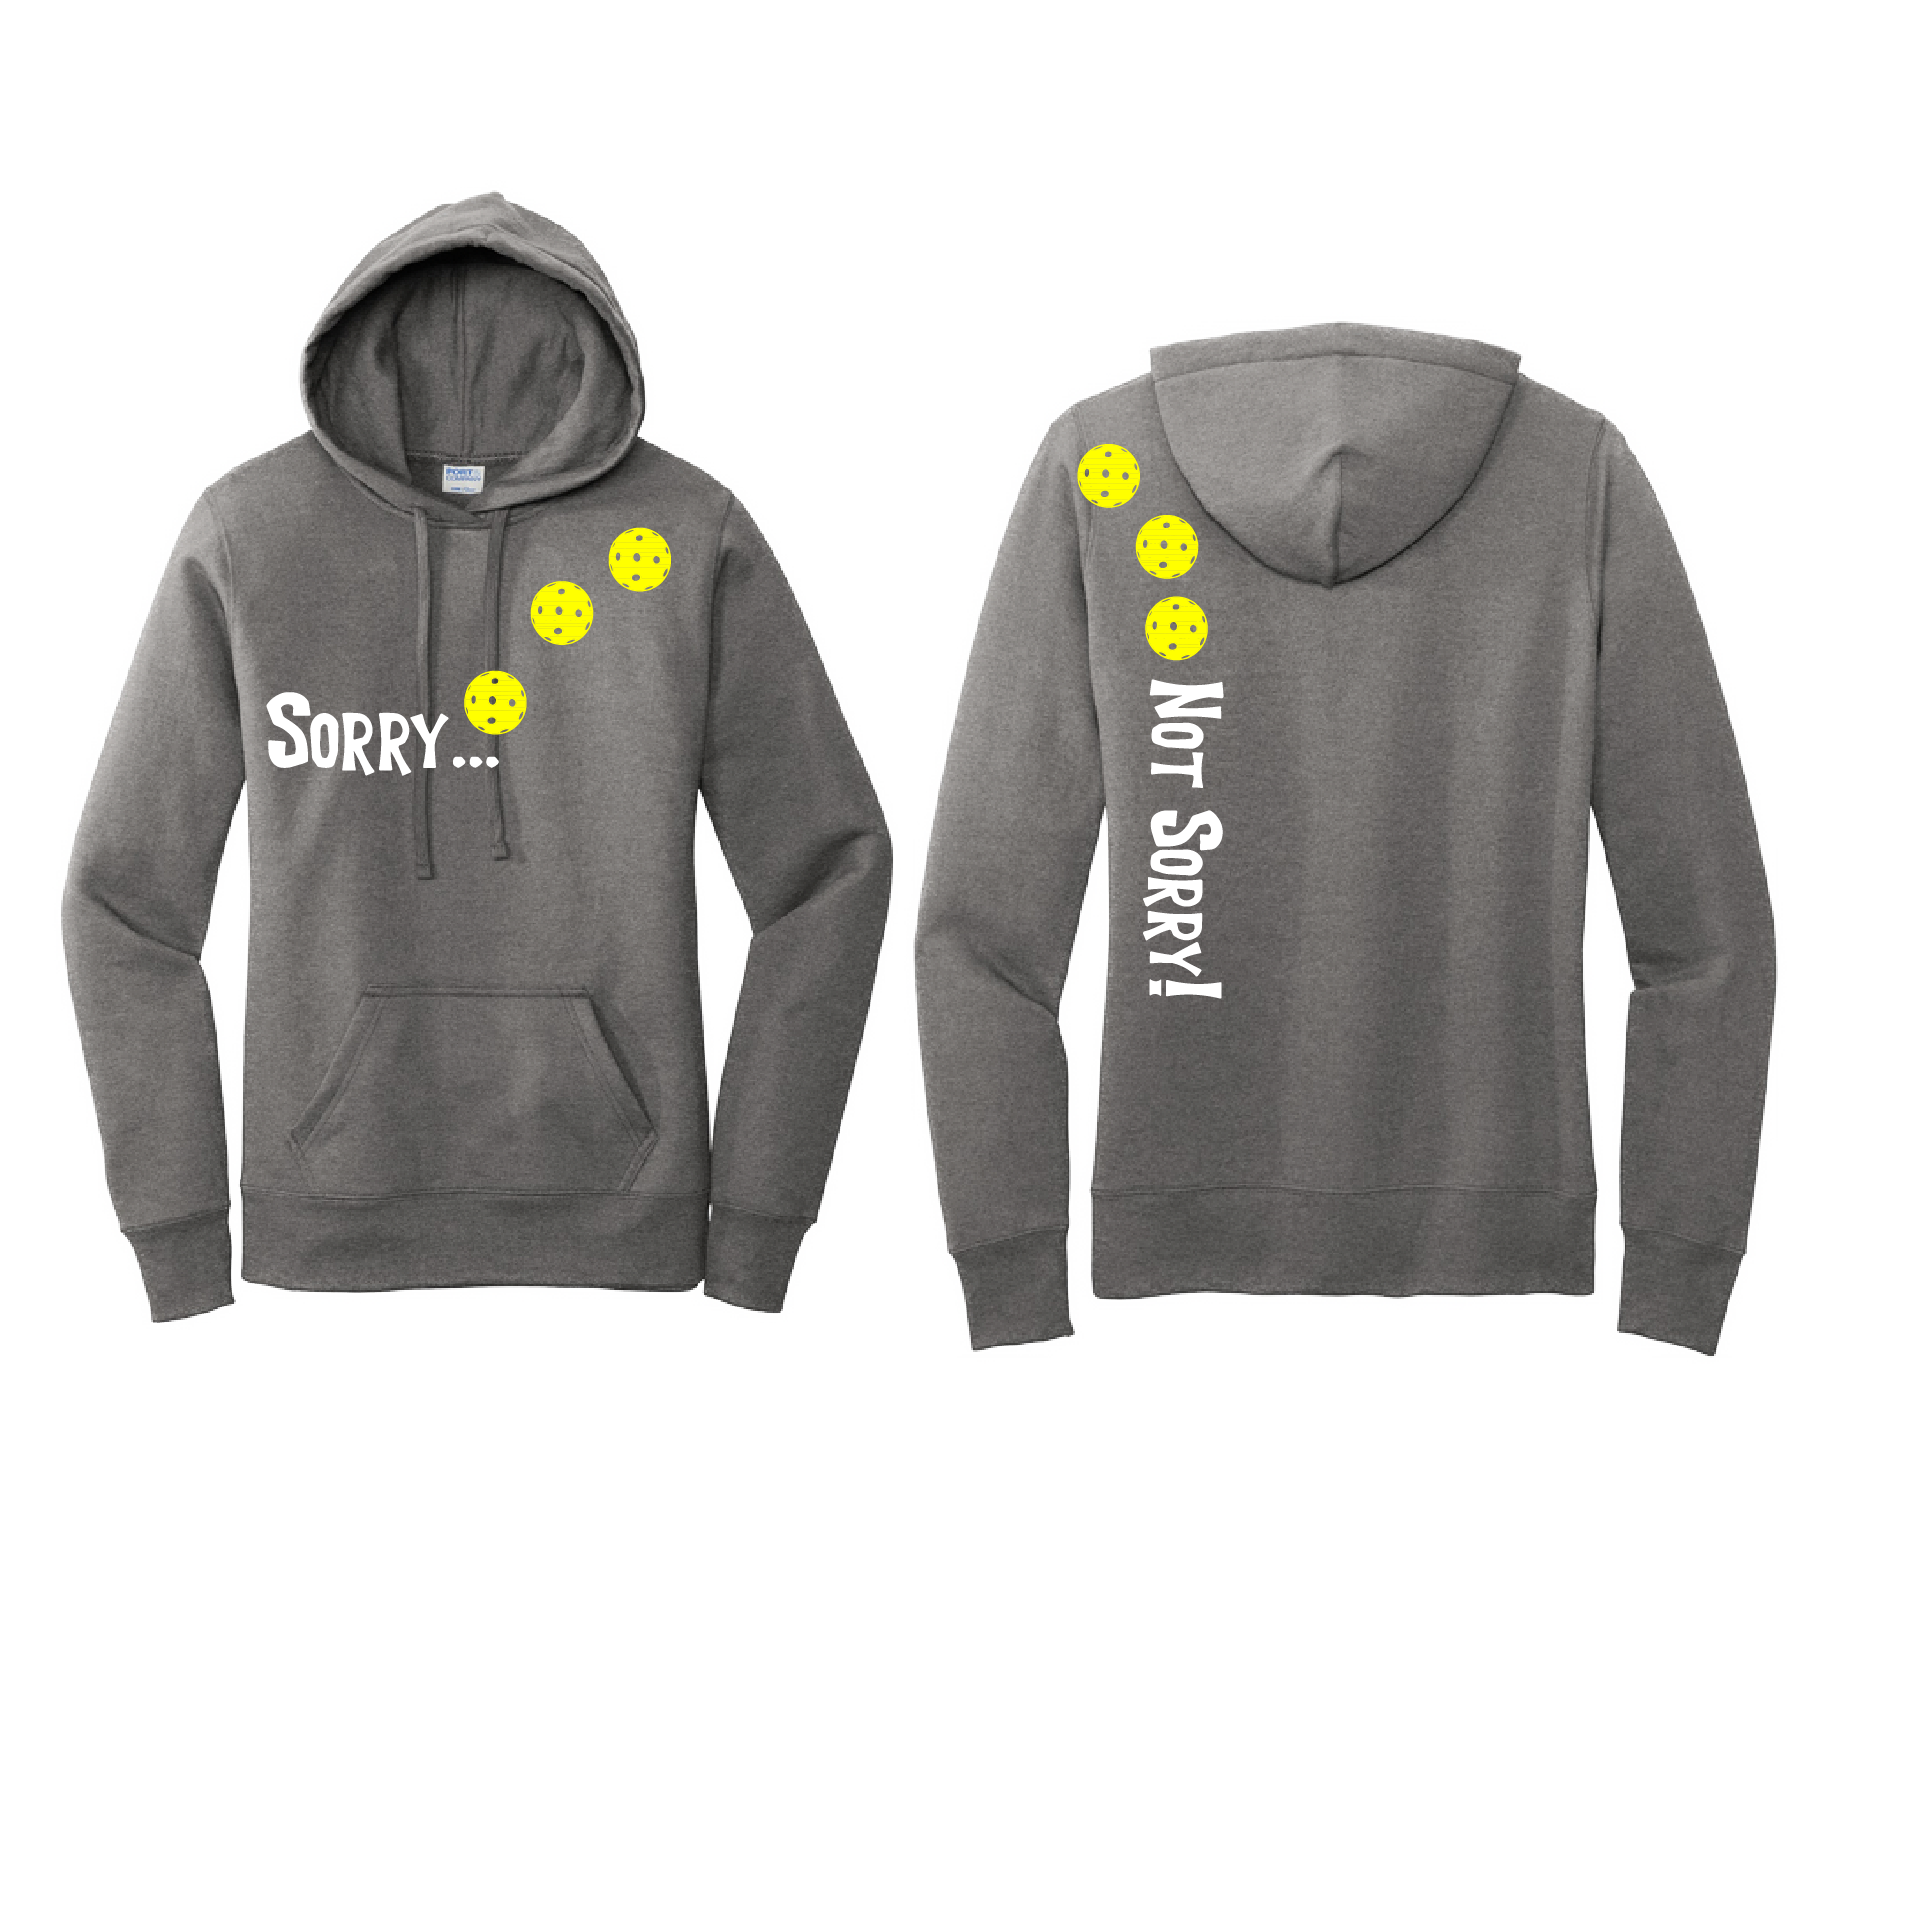 Pickleball Design: Sorry...Not Sorry!! with Customizable Ball Color – White, Green, Yellow or Pink Balls Women's Fitted Hoodie Sweatshirt-8 Ball Colors Turn up the volume in this Women's Sweatshirts with its perfect mix of softness and attitude. Ultra soft lined inside with a lined hood also. This is fitted nicely for a women's figure. Front pouch pocket.